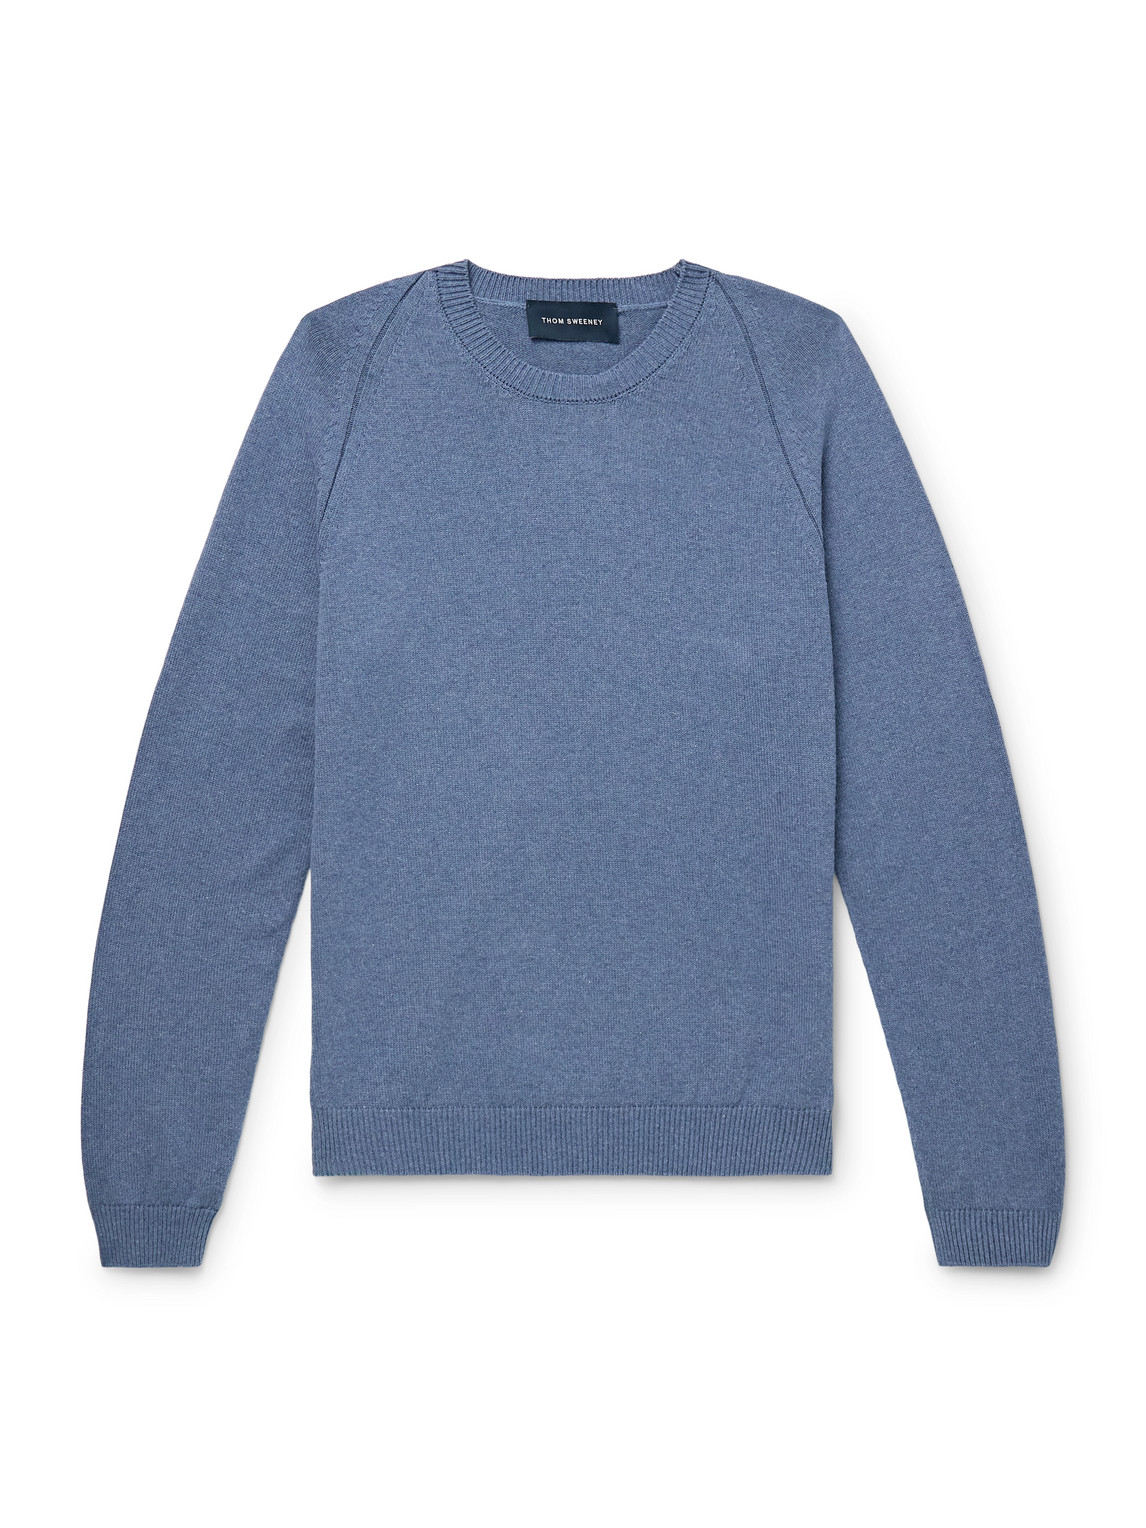 Thom Sweeney Cotton Jumper In Blue